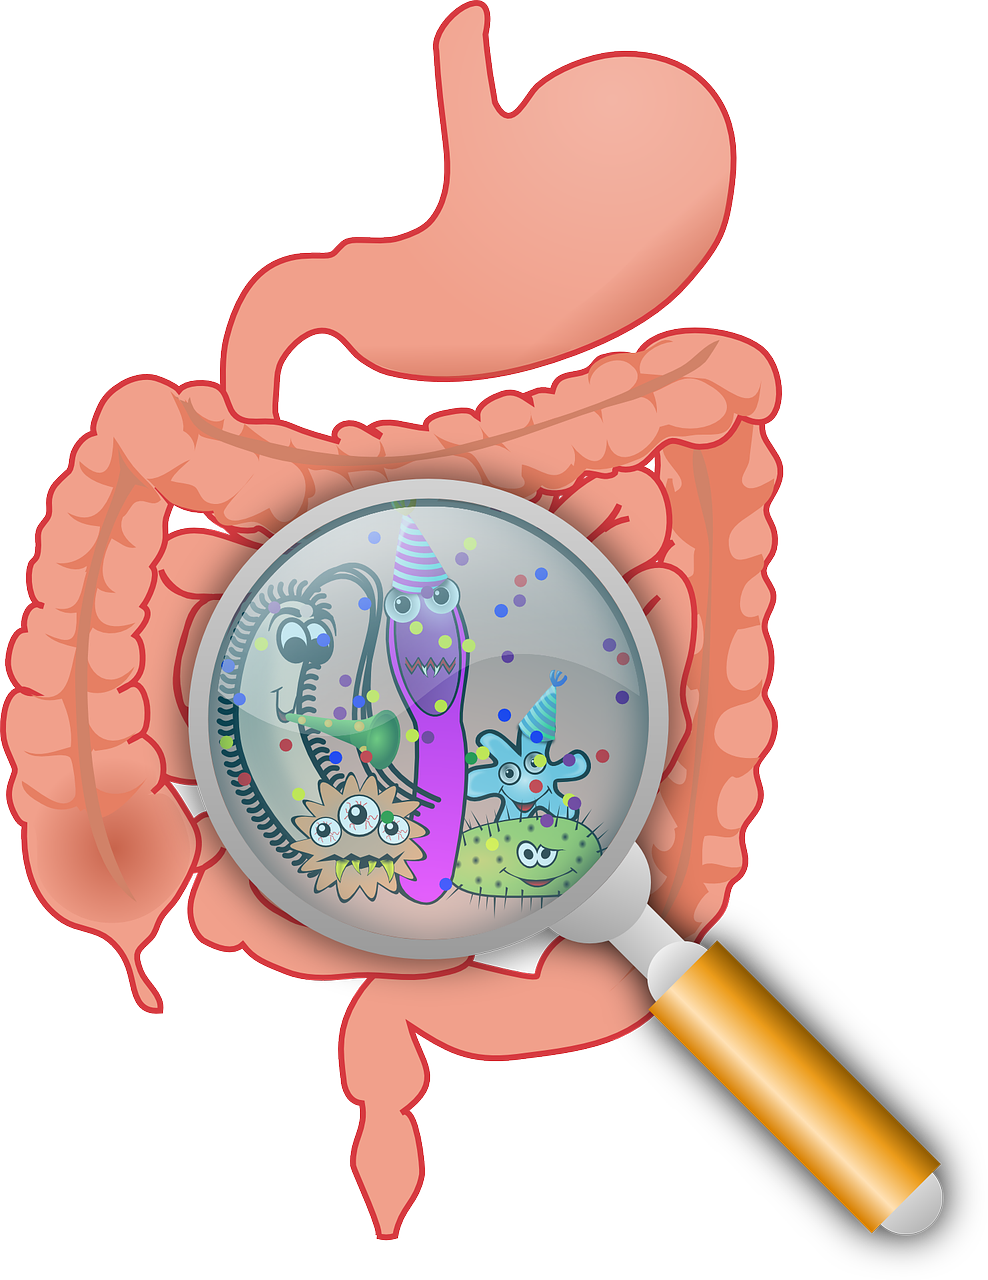 YOUR GUT MICROBIOME AND HEALTH